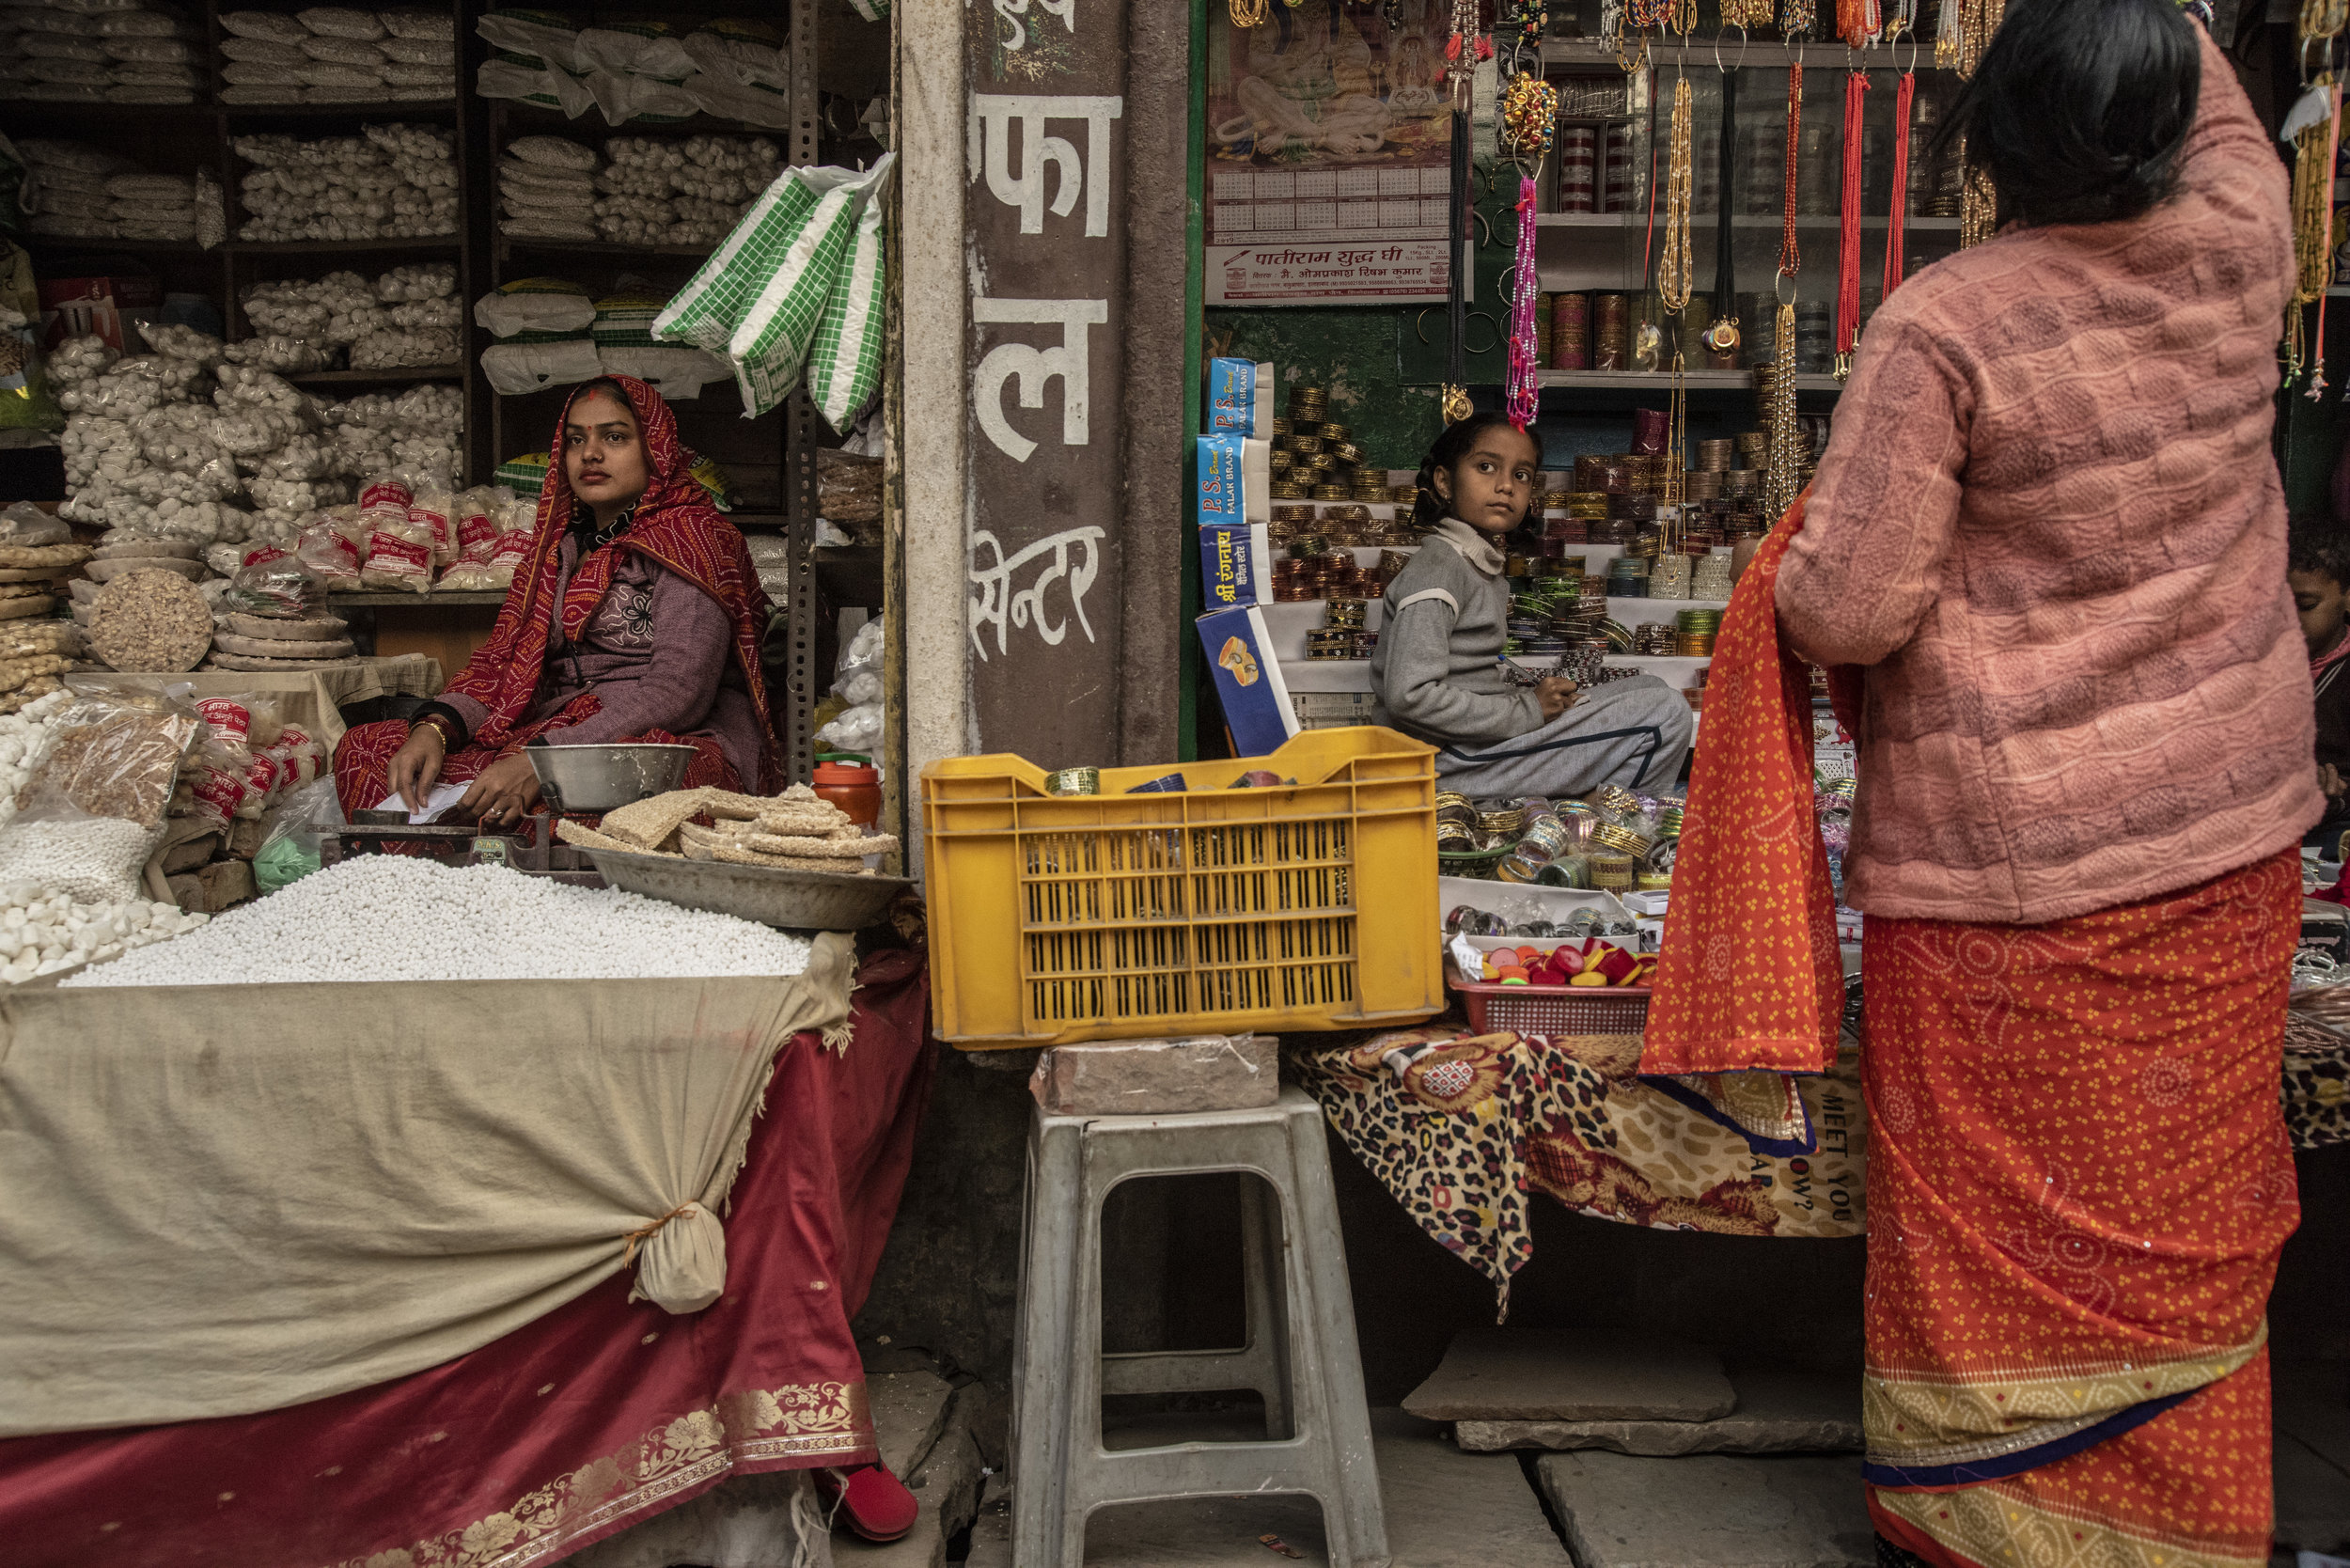  A woman and a young girl in a market in Allahabad, though divided, share the same expression 